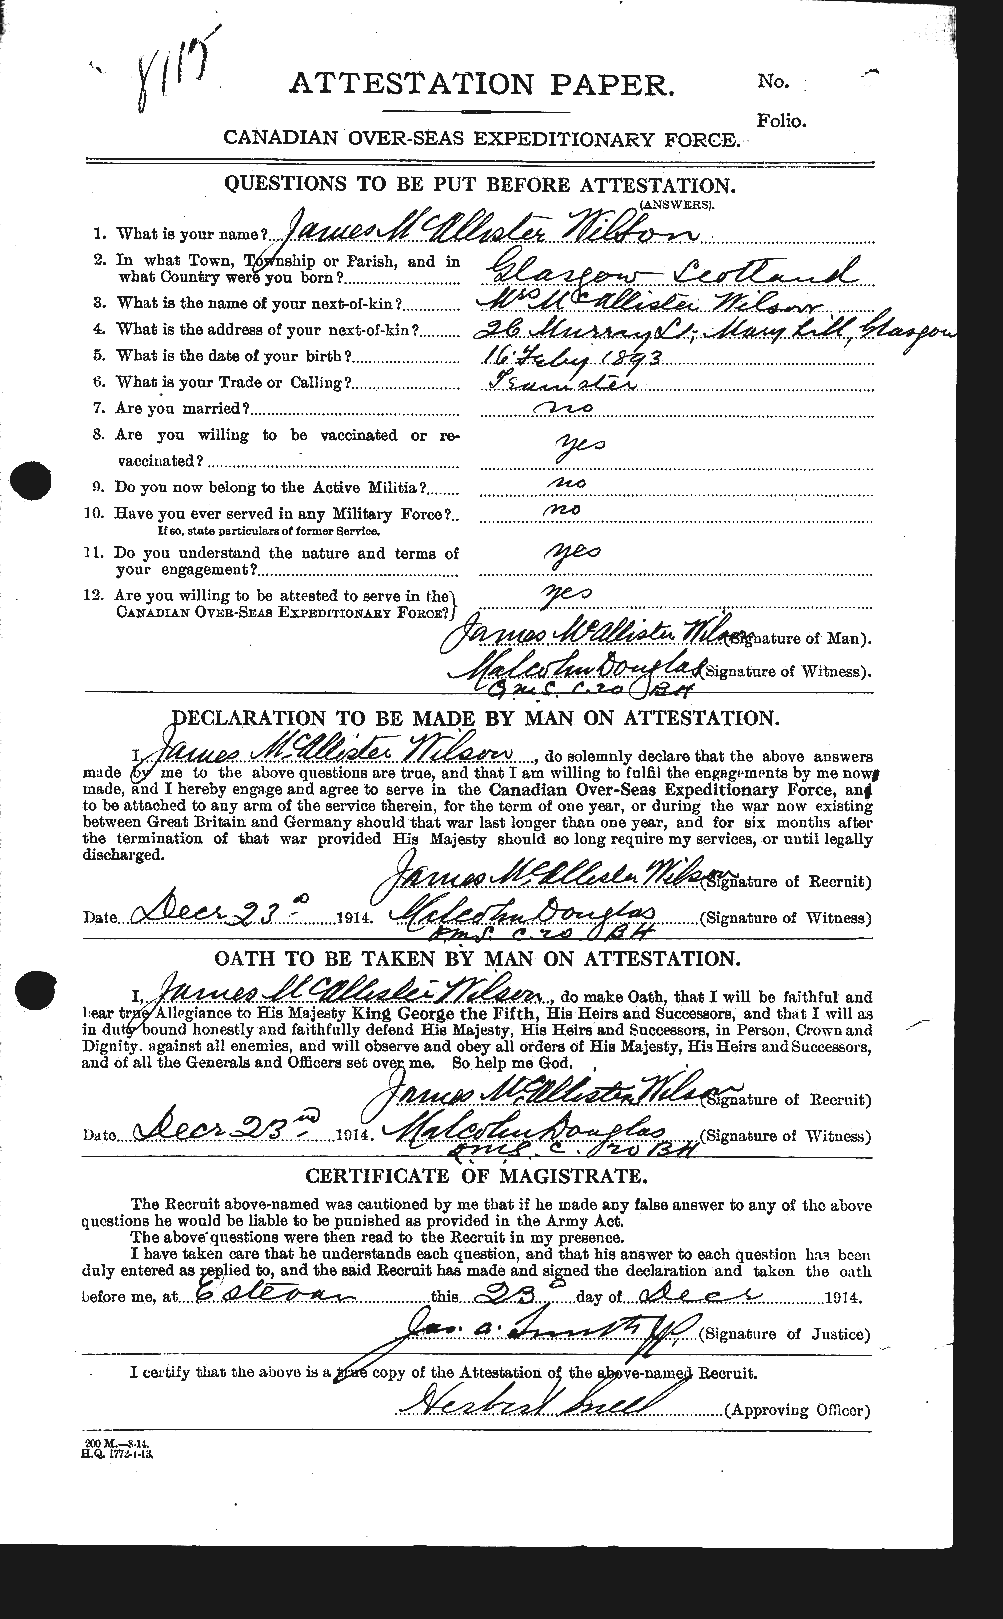 Personnel Records of the First World War - CEF 681481a